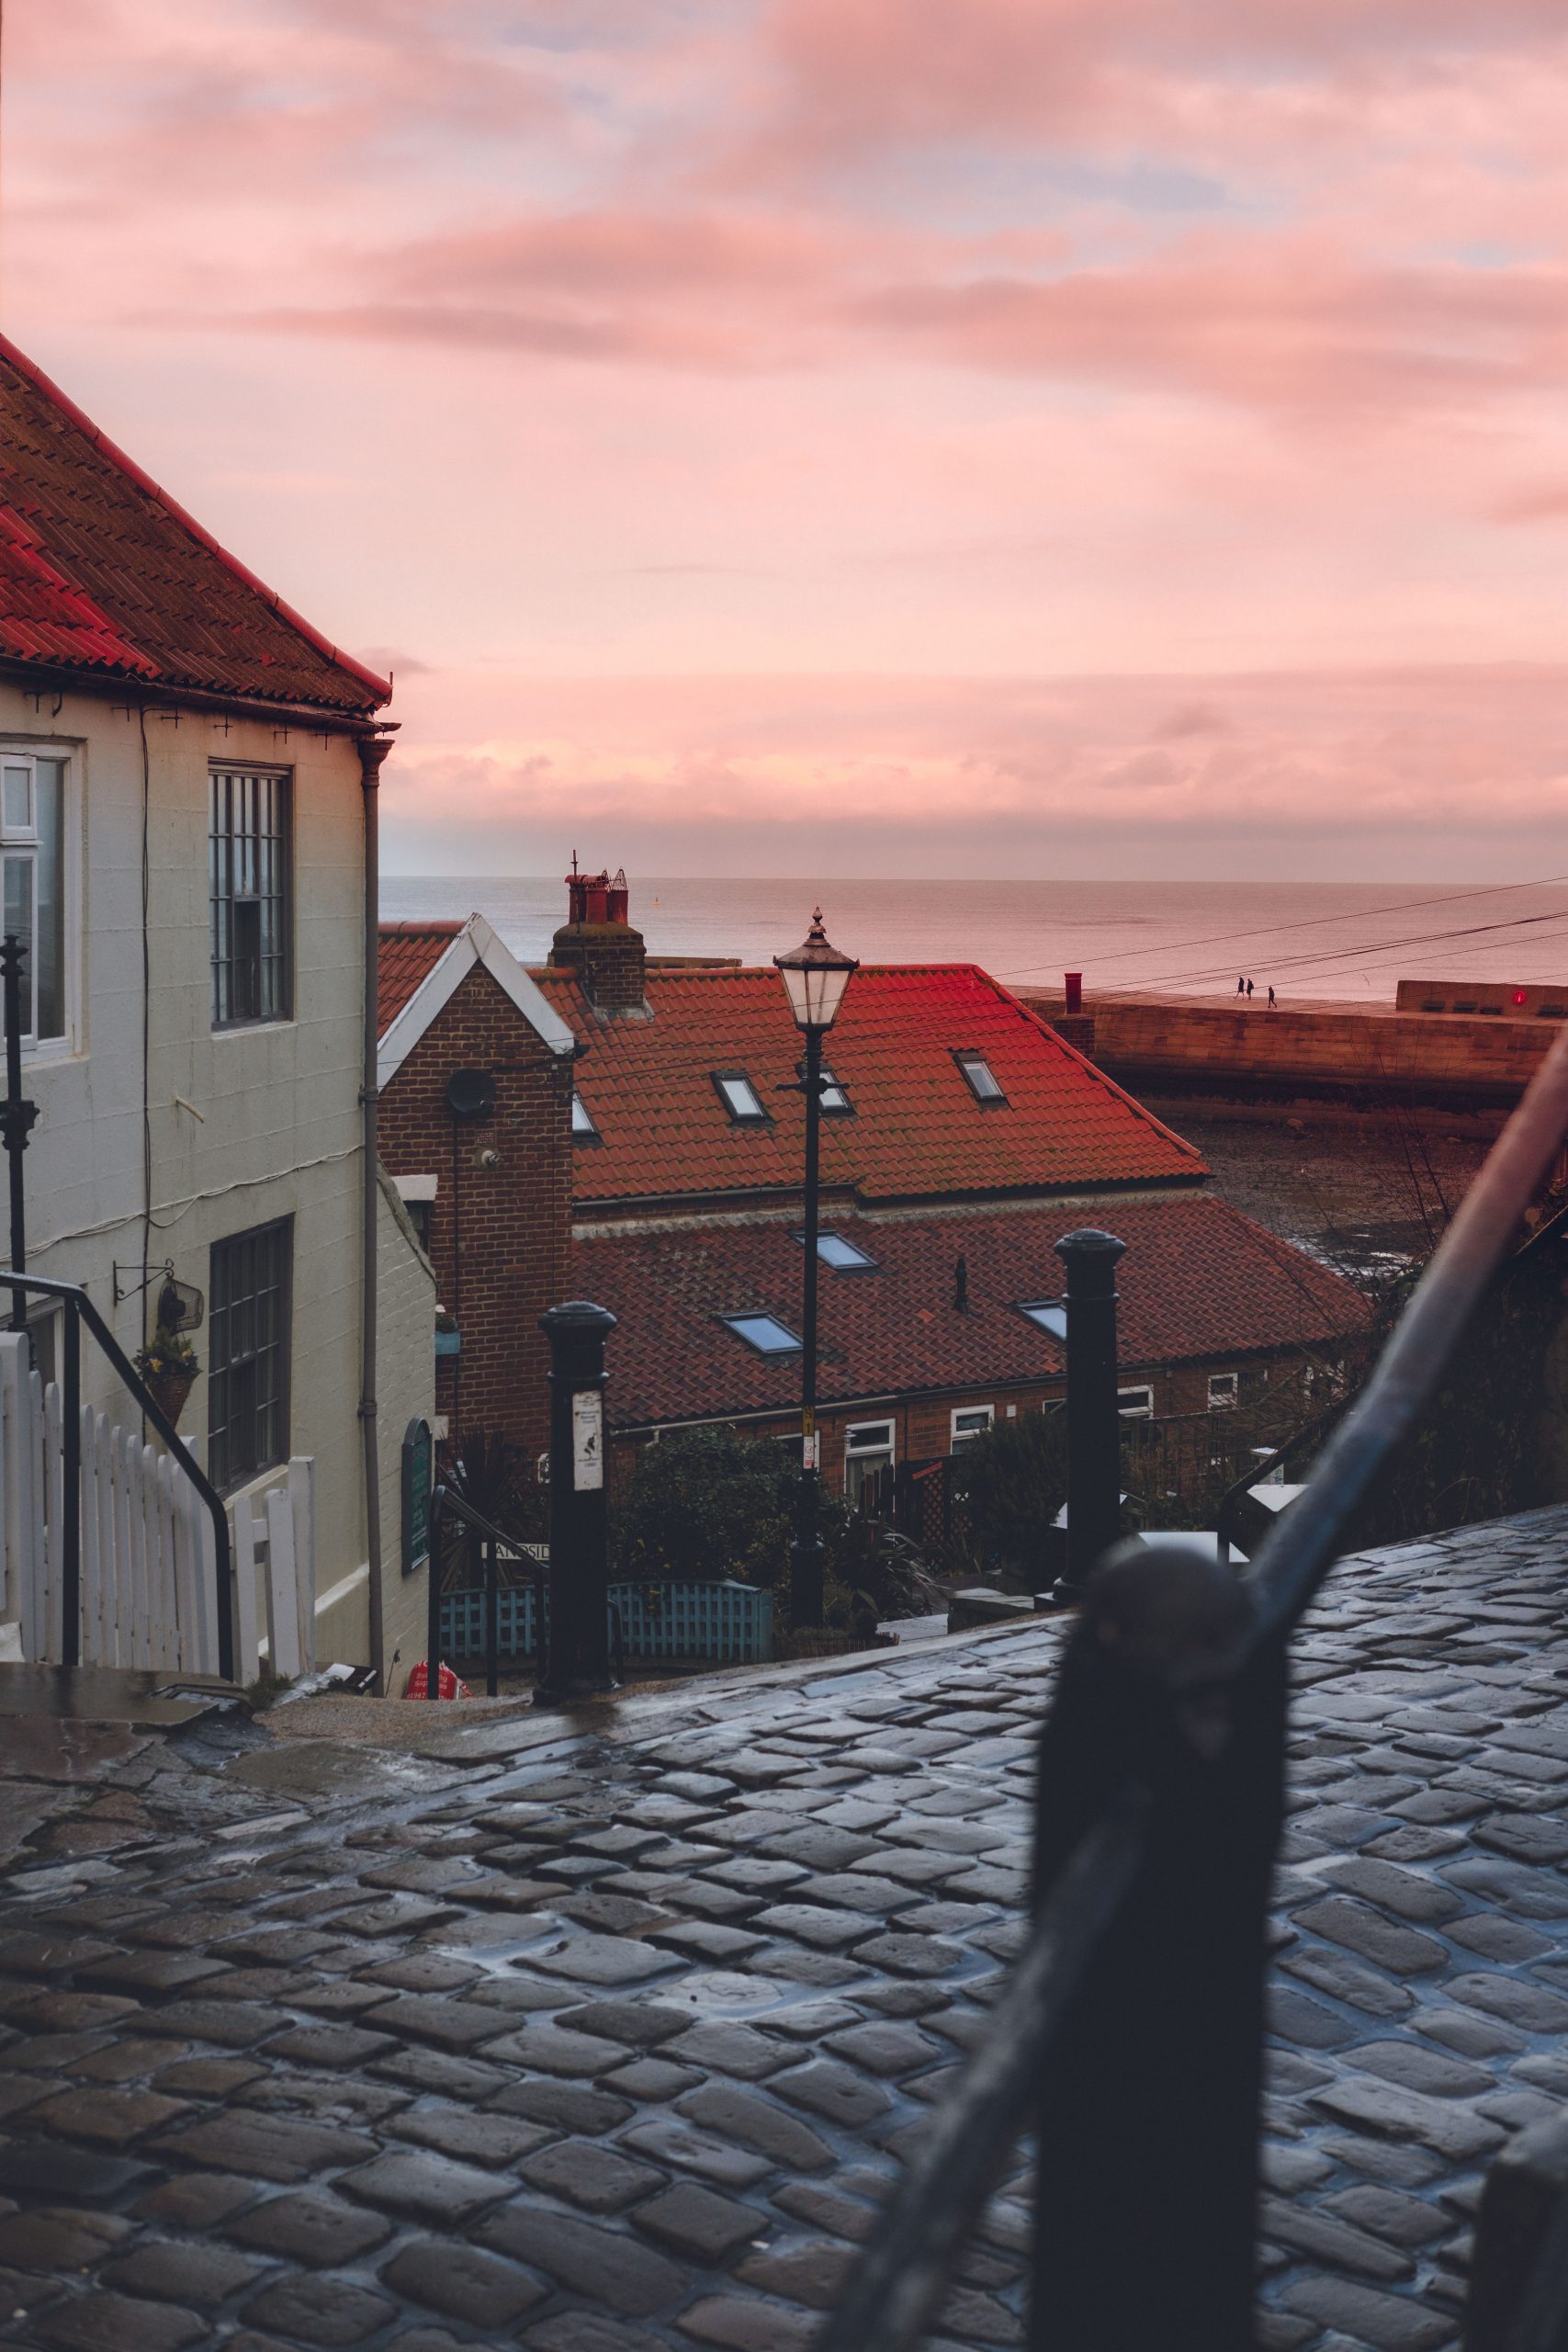 Whitby town during sunset